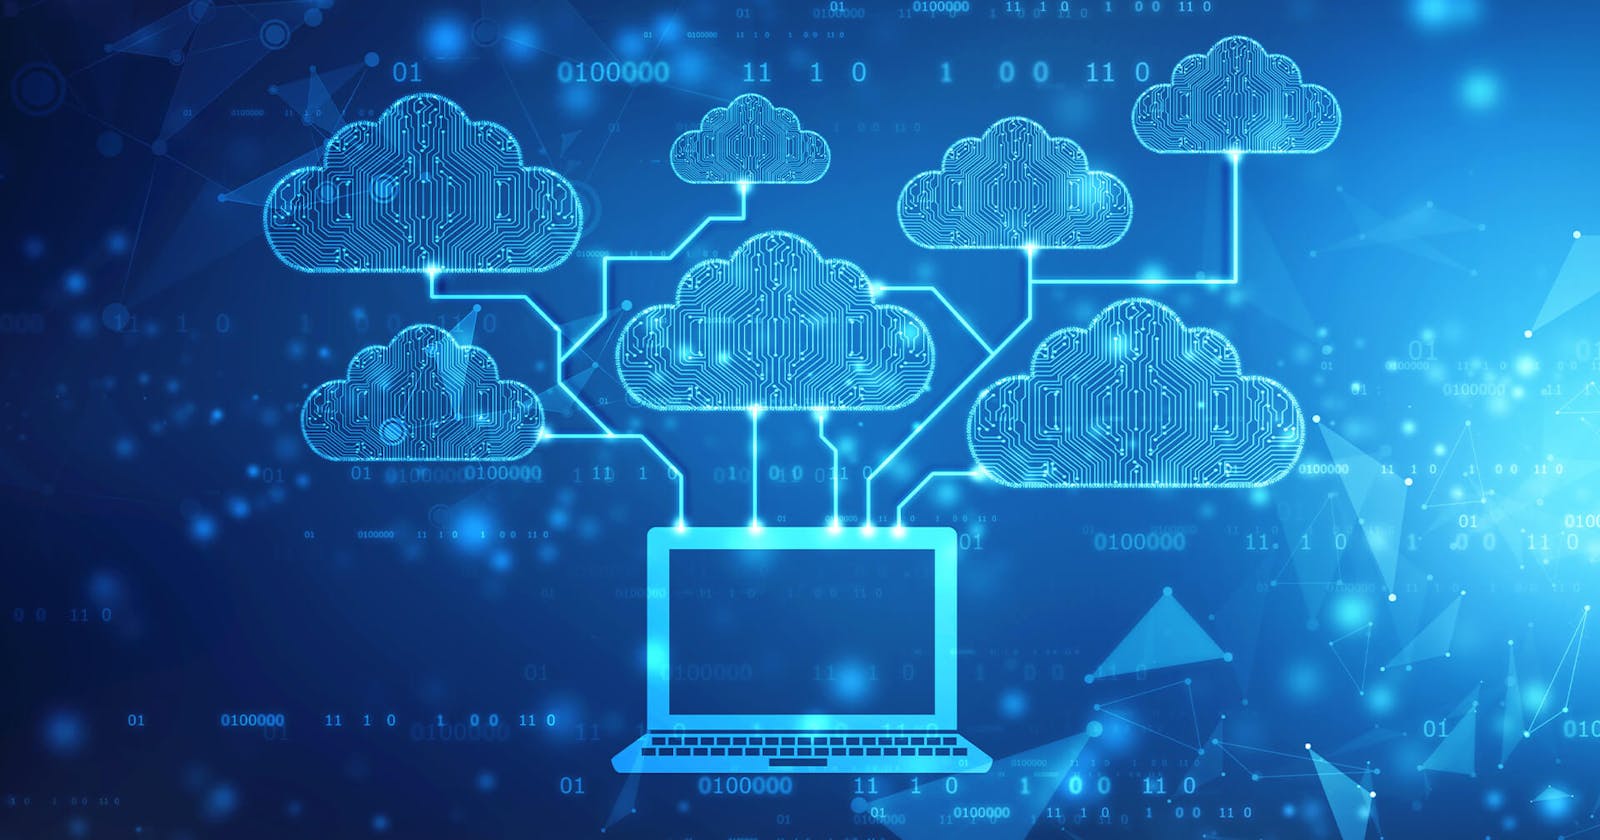 Cloud computing for Small Businesses